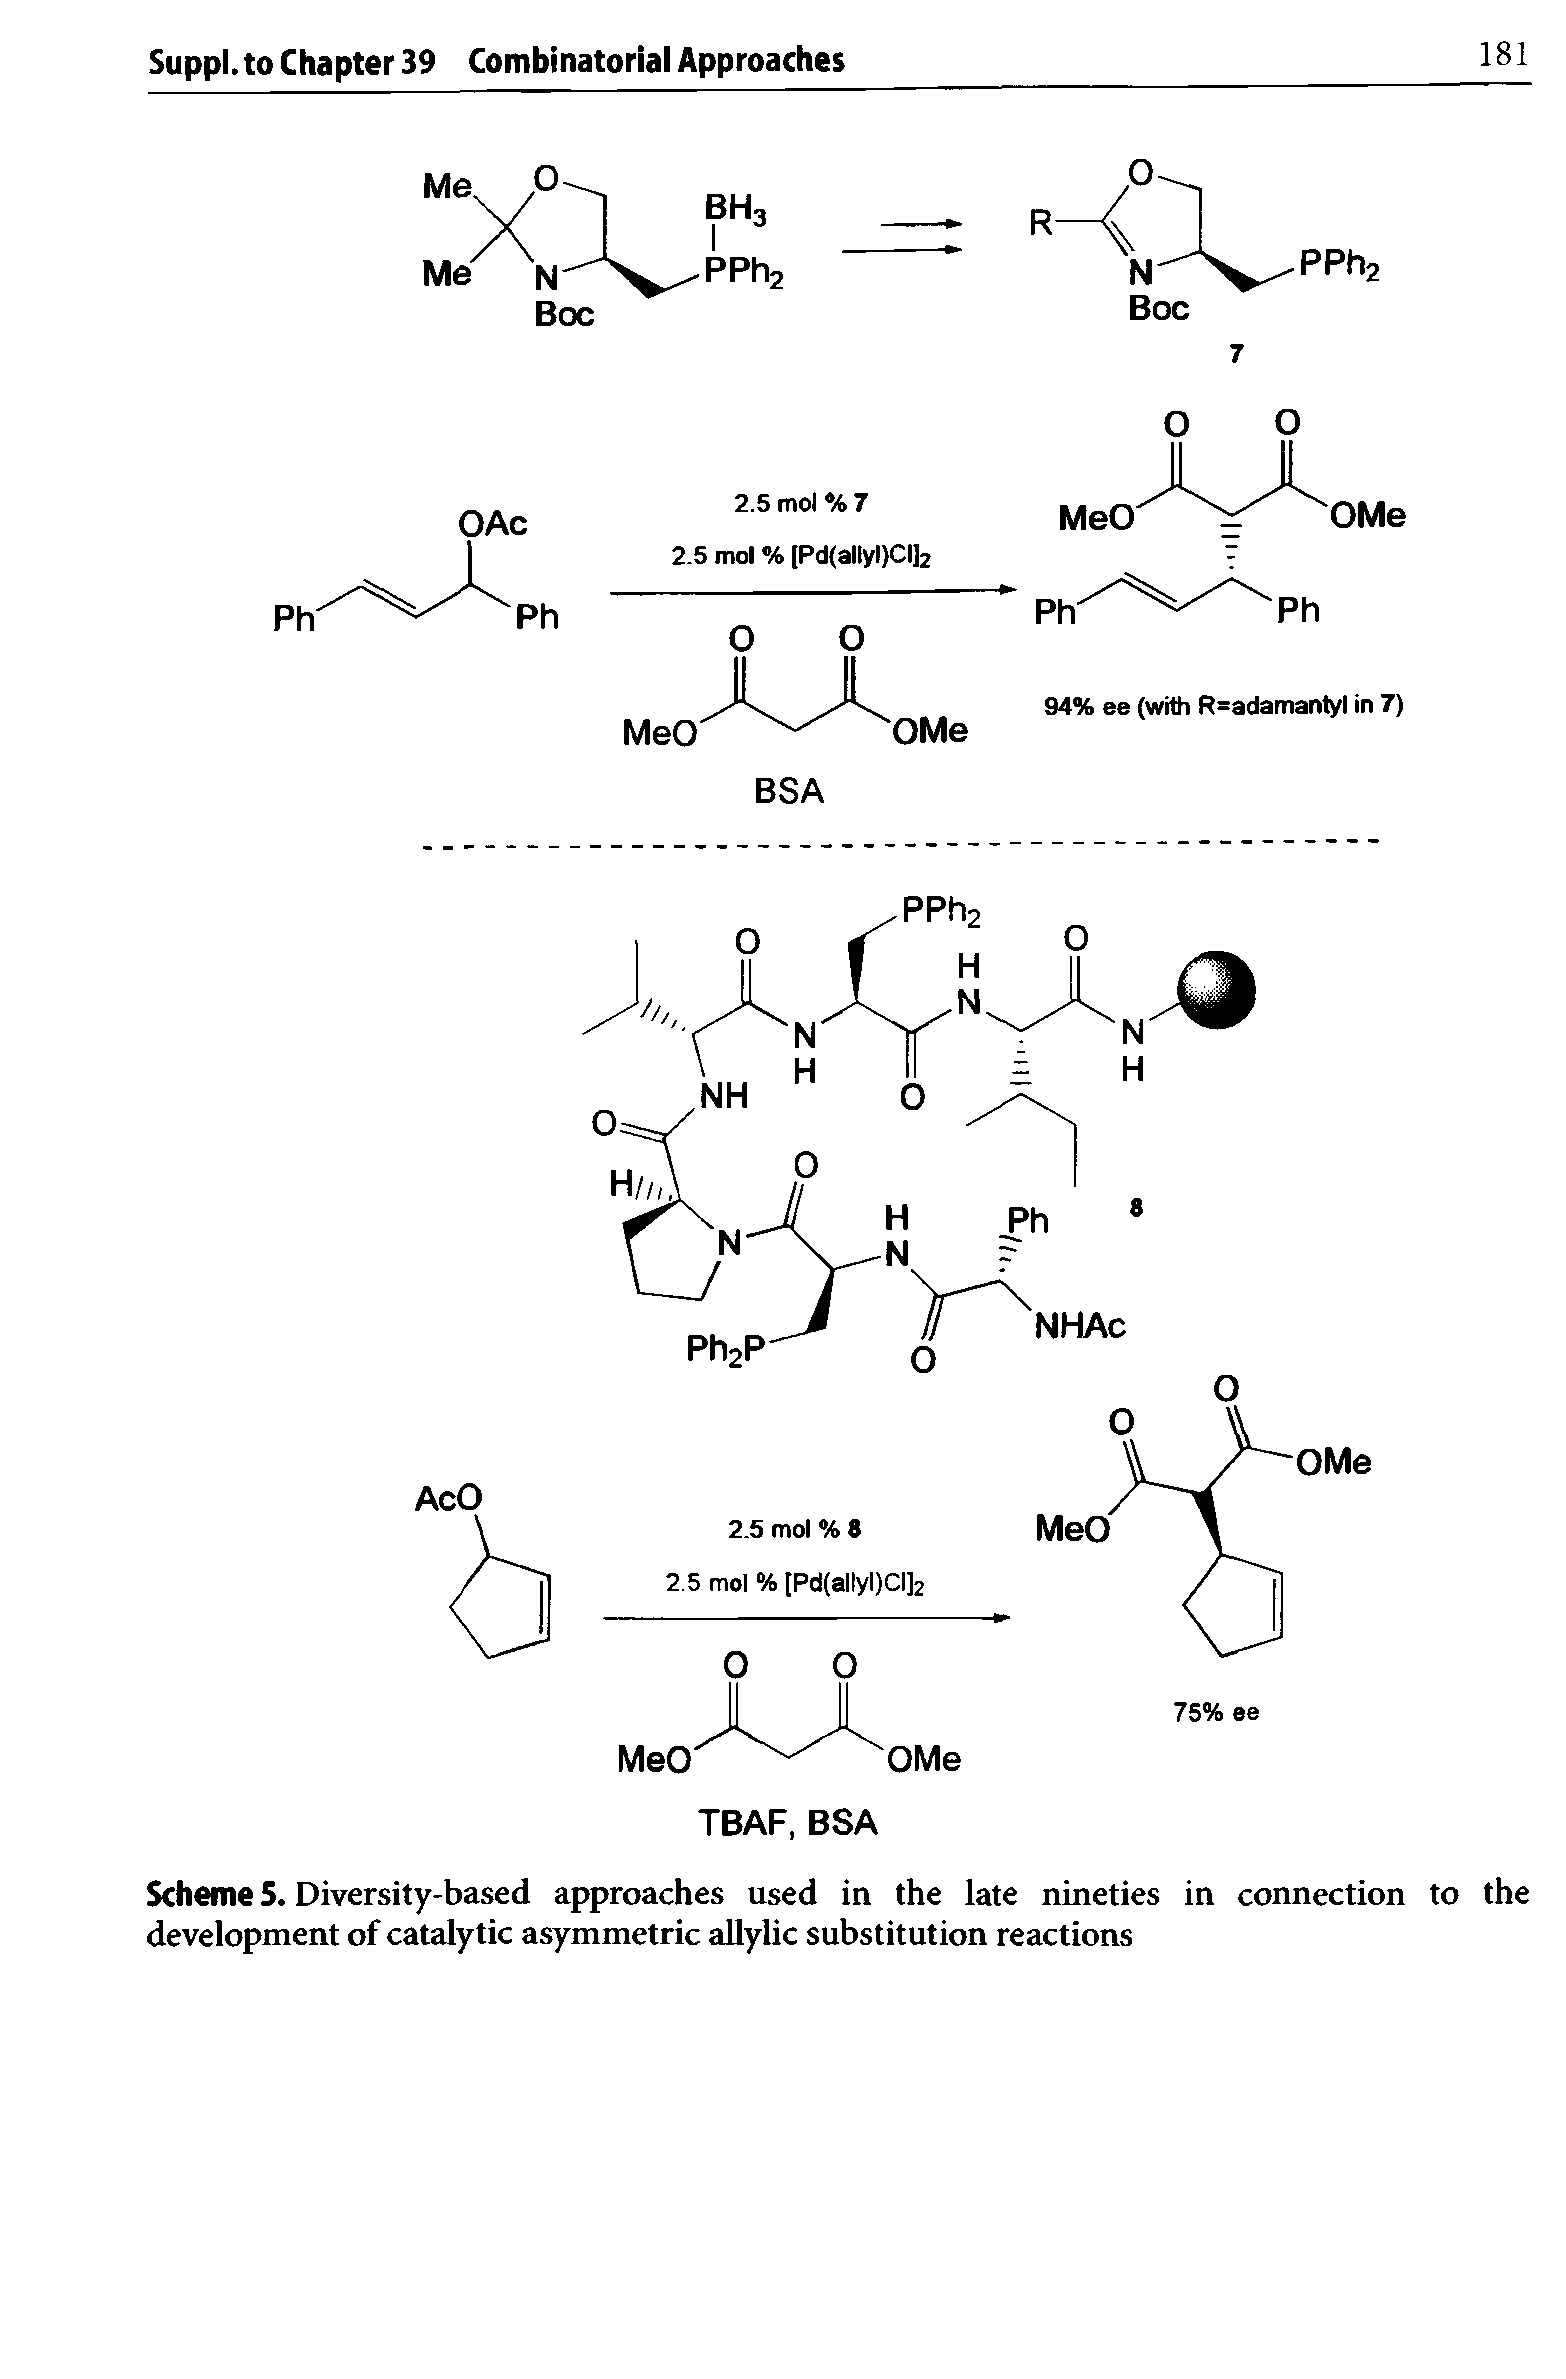 Scheme 5. Diversity-based approaches used in the late nineties in connection to the development of catalytic asymmetric allylic substitution reactions...